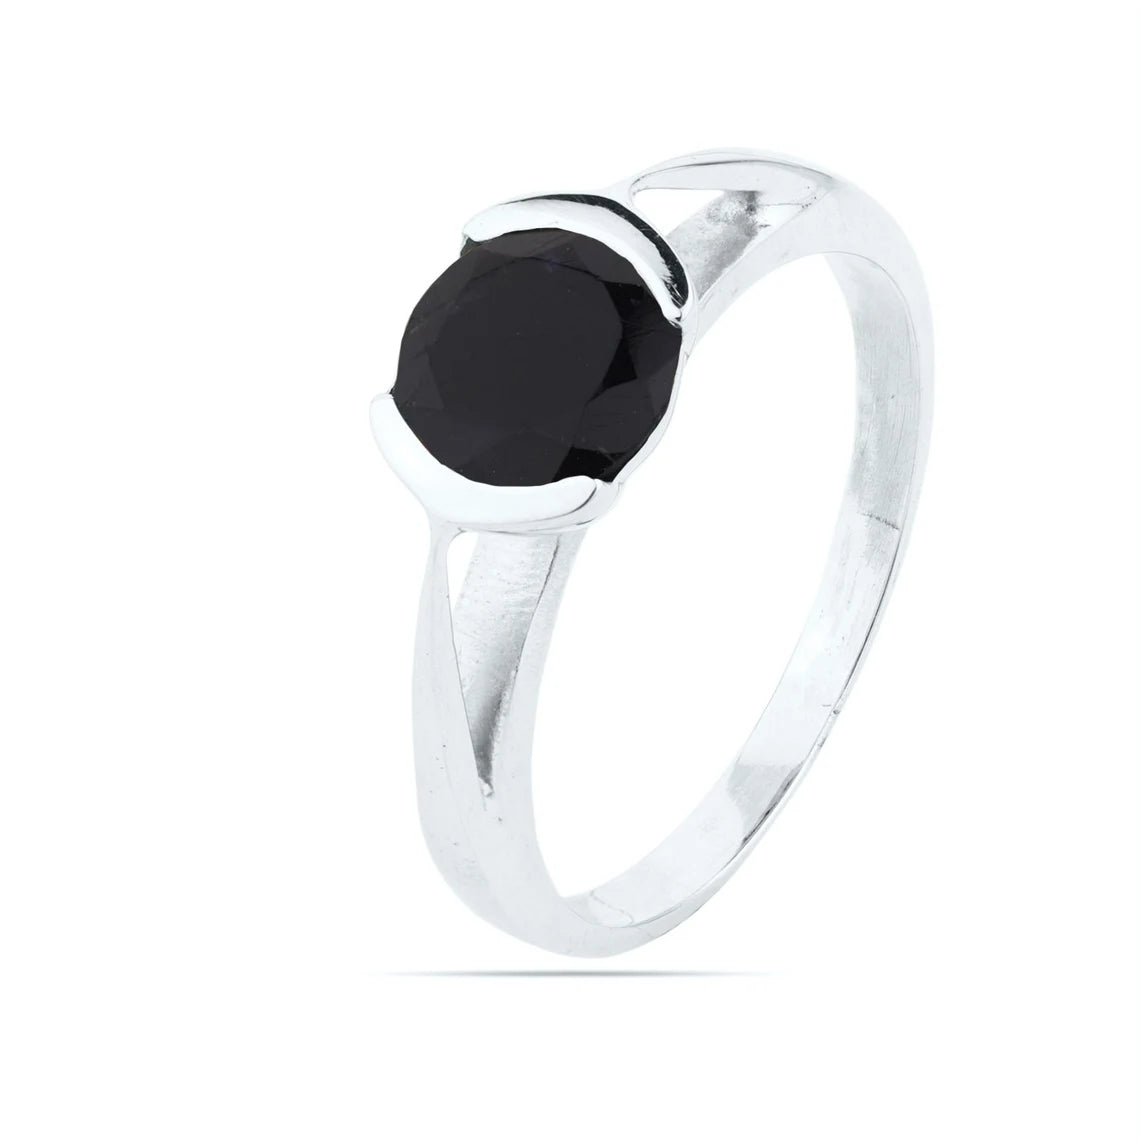 Round Black Onyx Stacking Ring in Sterling Silver, 7 mm, Small Black Onyx Ring, Black Onyx Silver Ring, Womens Jewelry